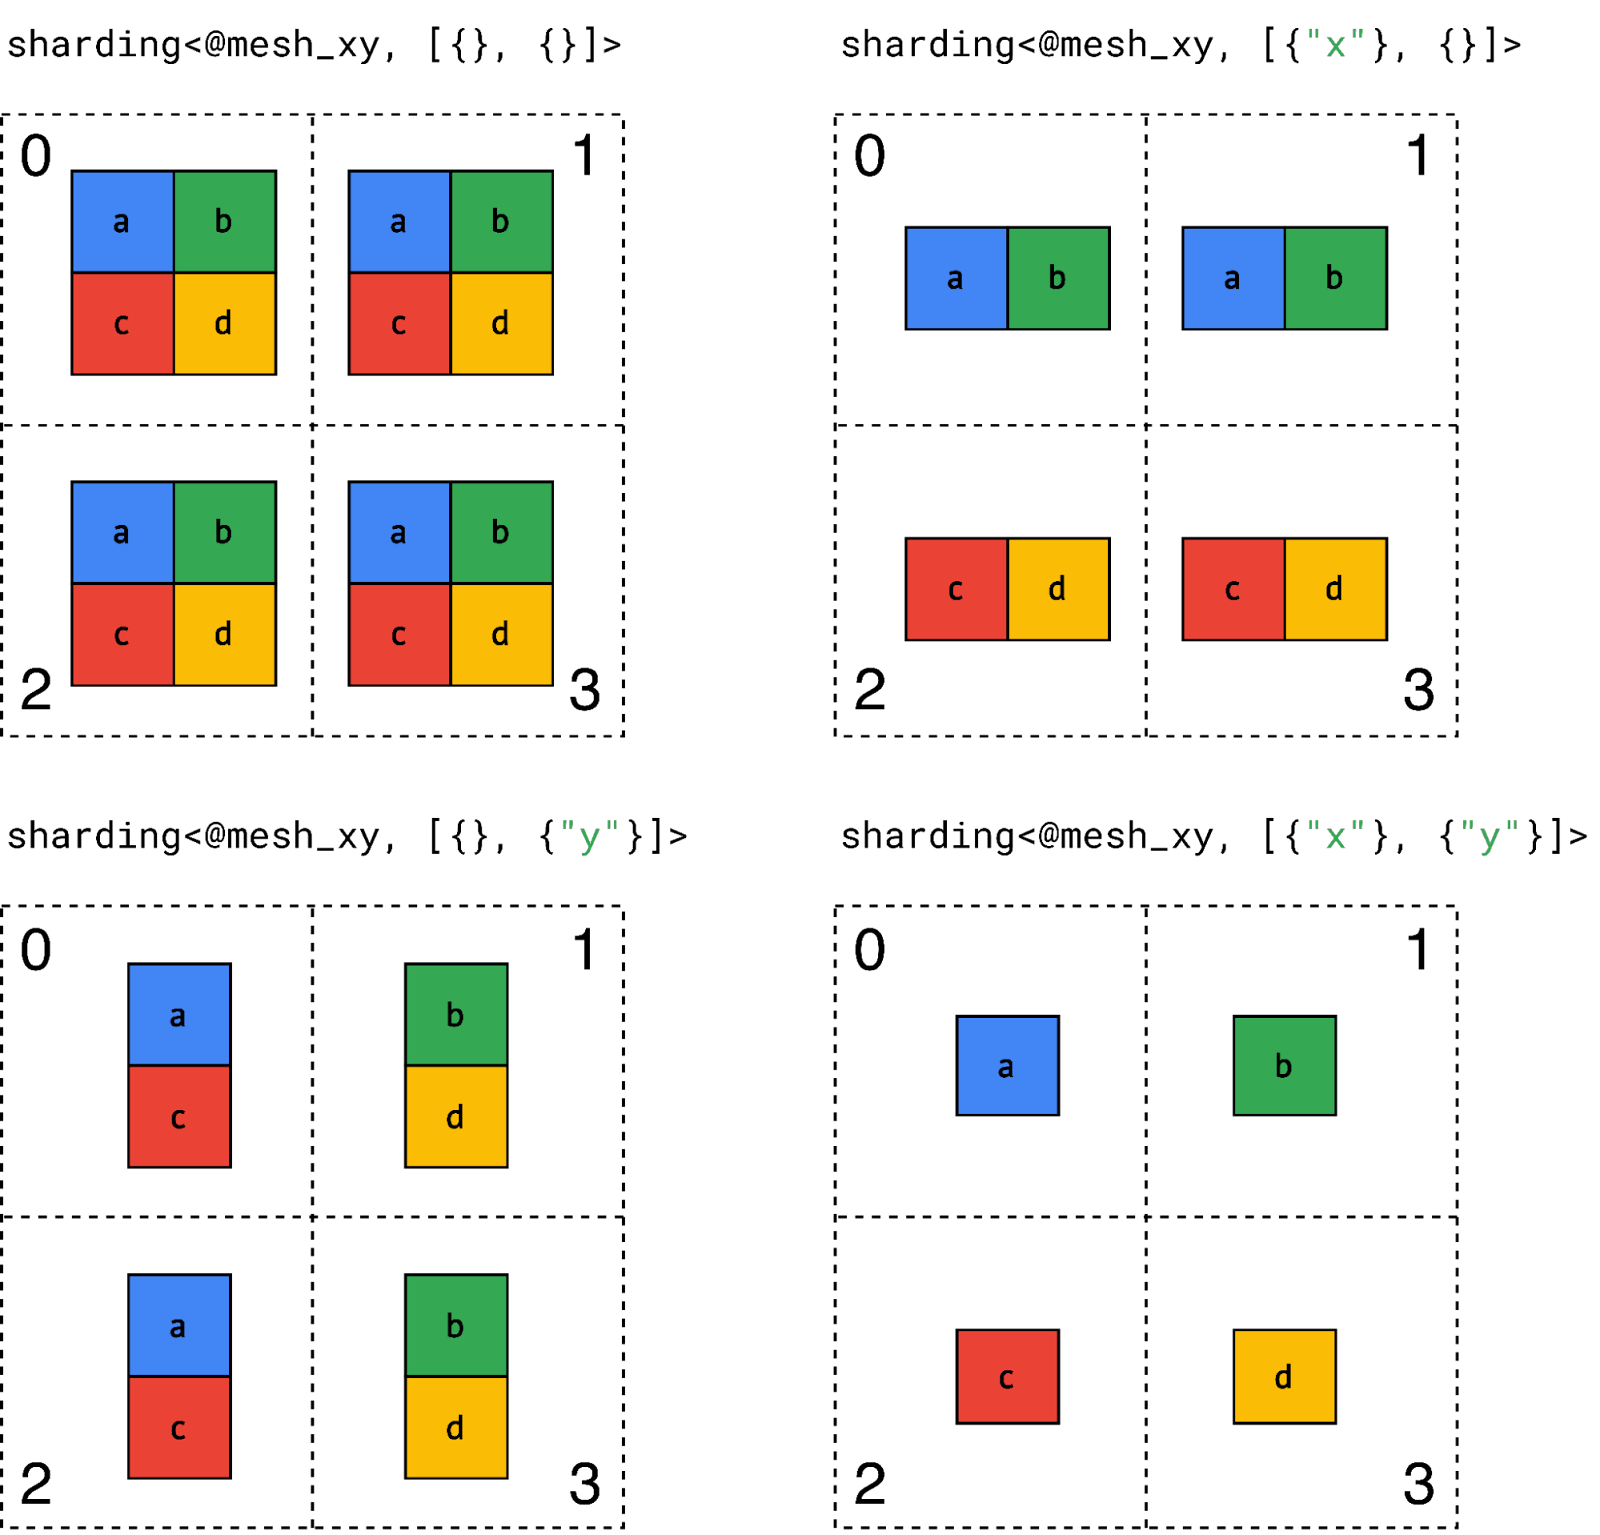 Diagram of sharding representation with a simple rank 2 tensor and 4 devices.